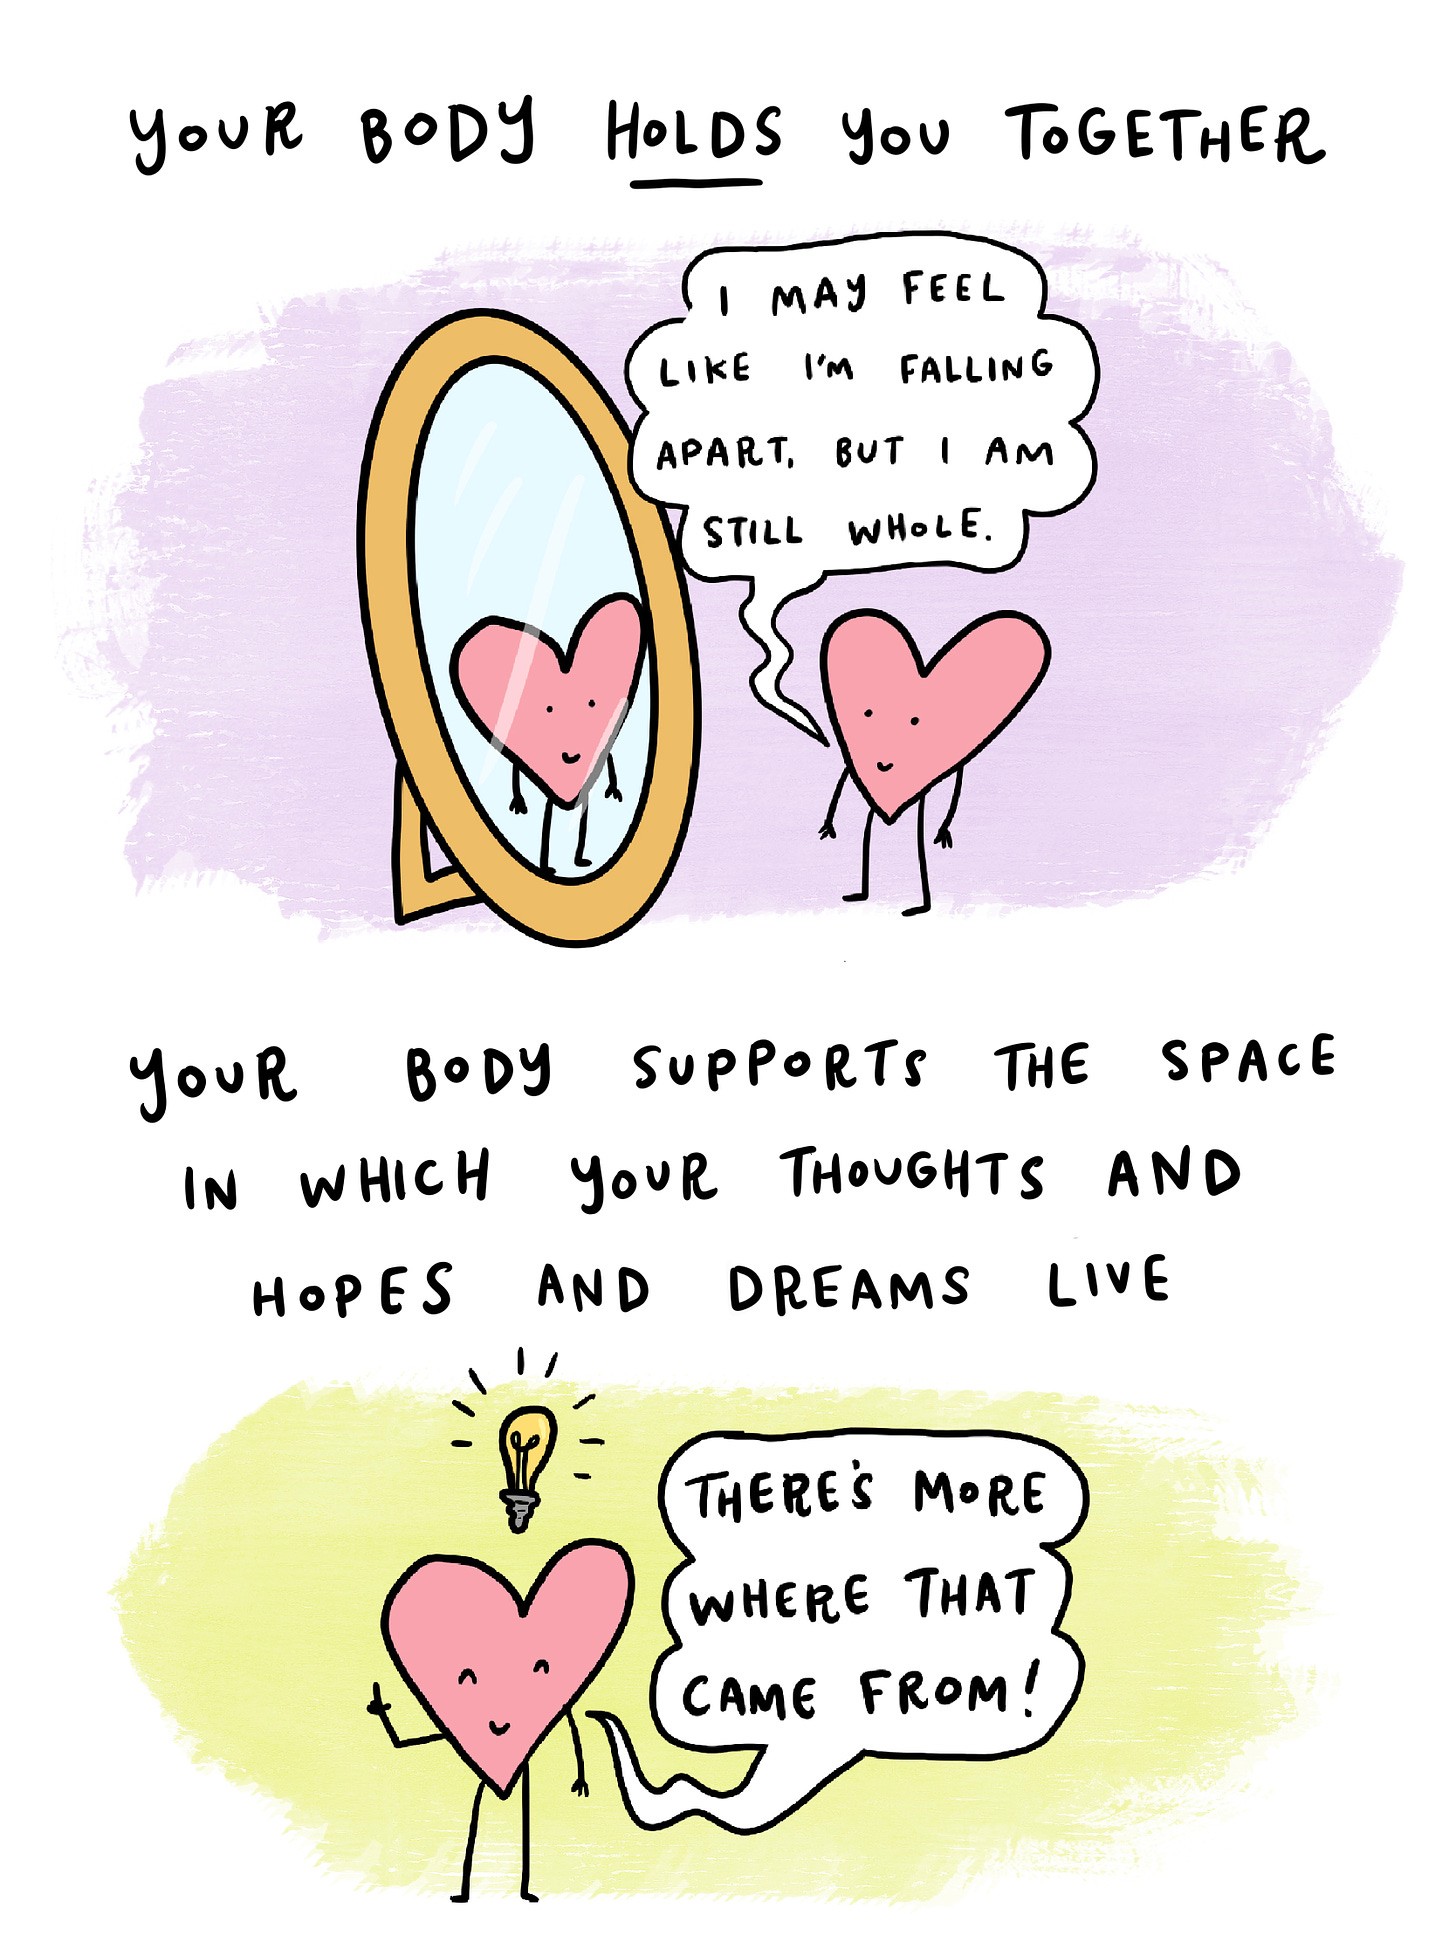 Your body holds you together. Your body supports the space where your dreams live. 